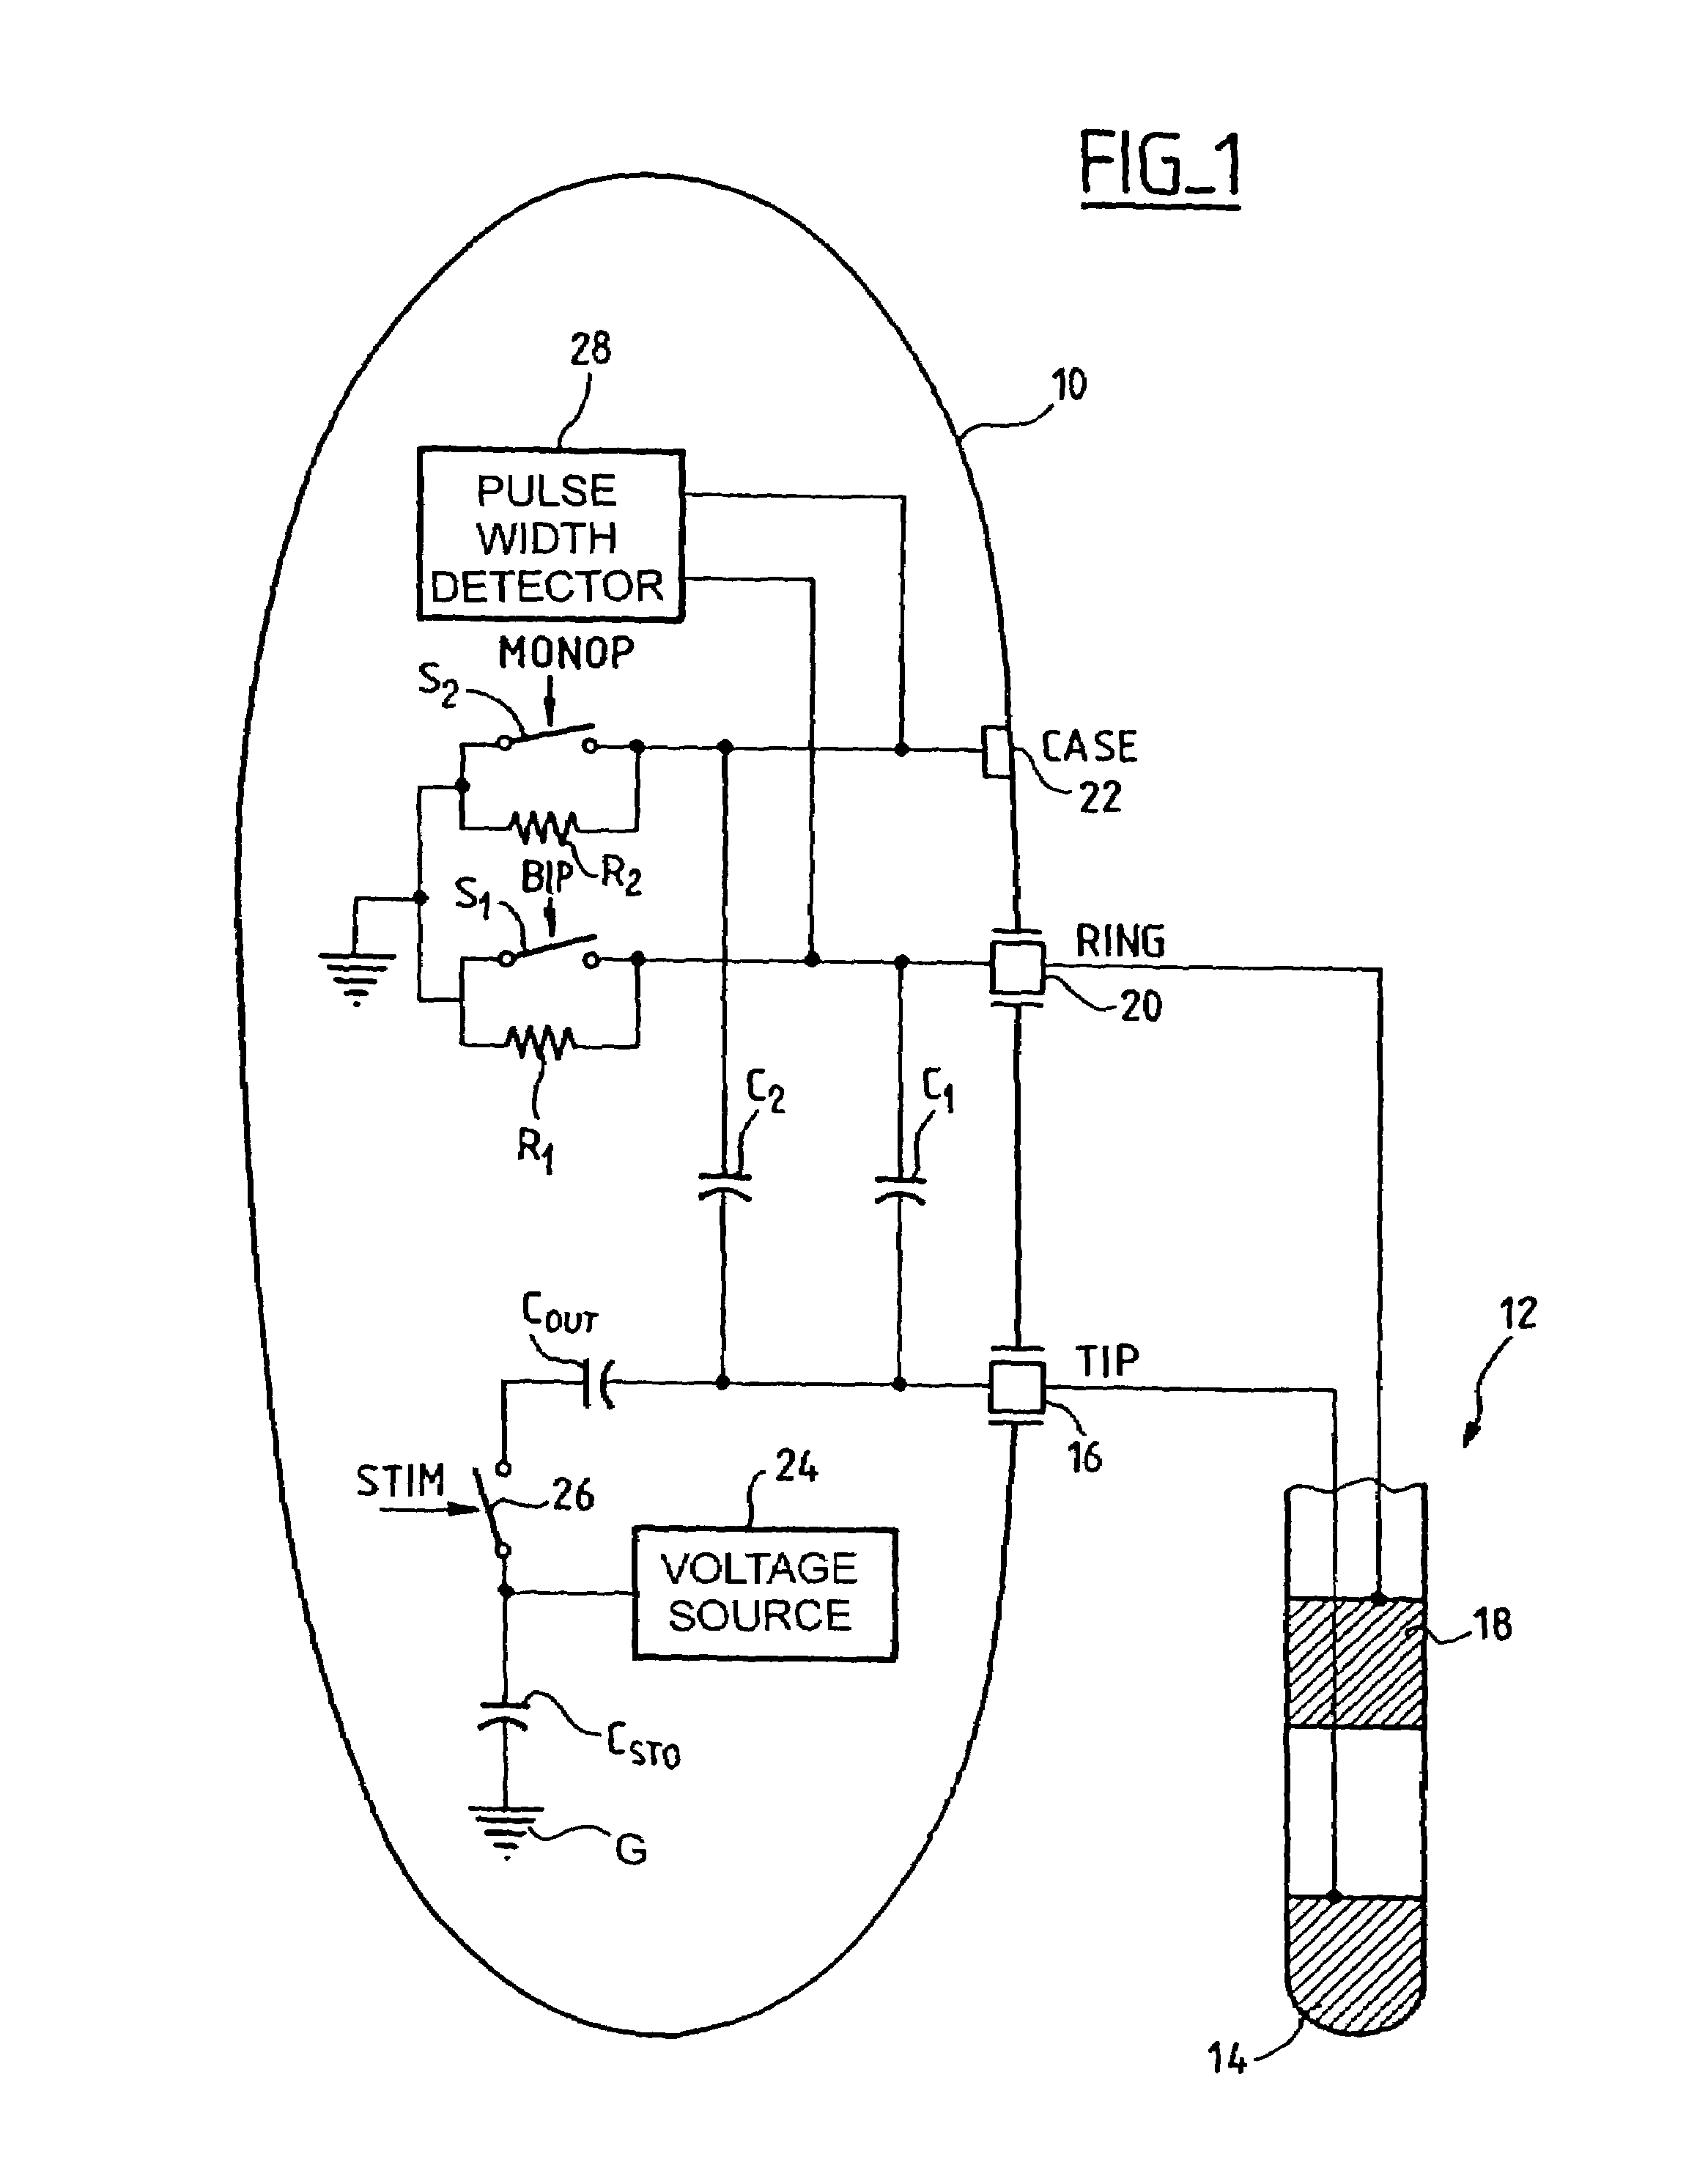 Determining the presence and type of probe associated with an active implantable medical device, in particular a cardiac pacemaker